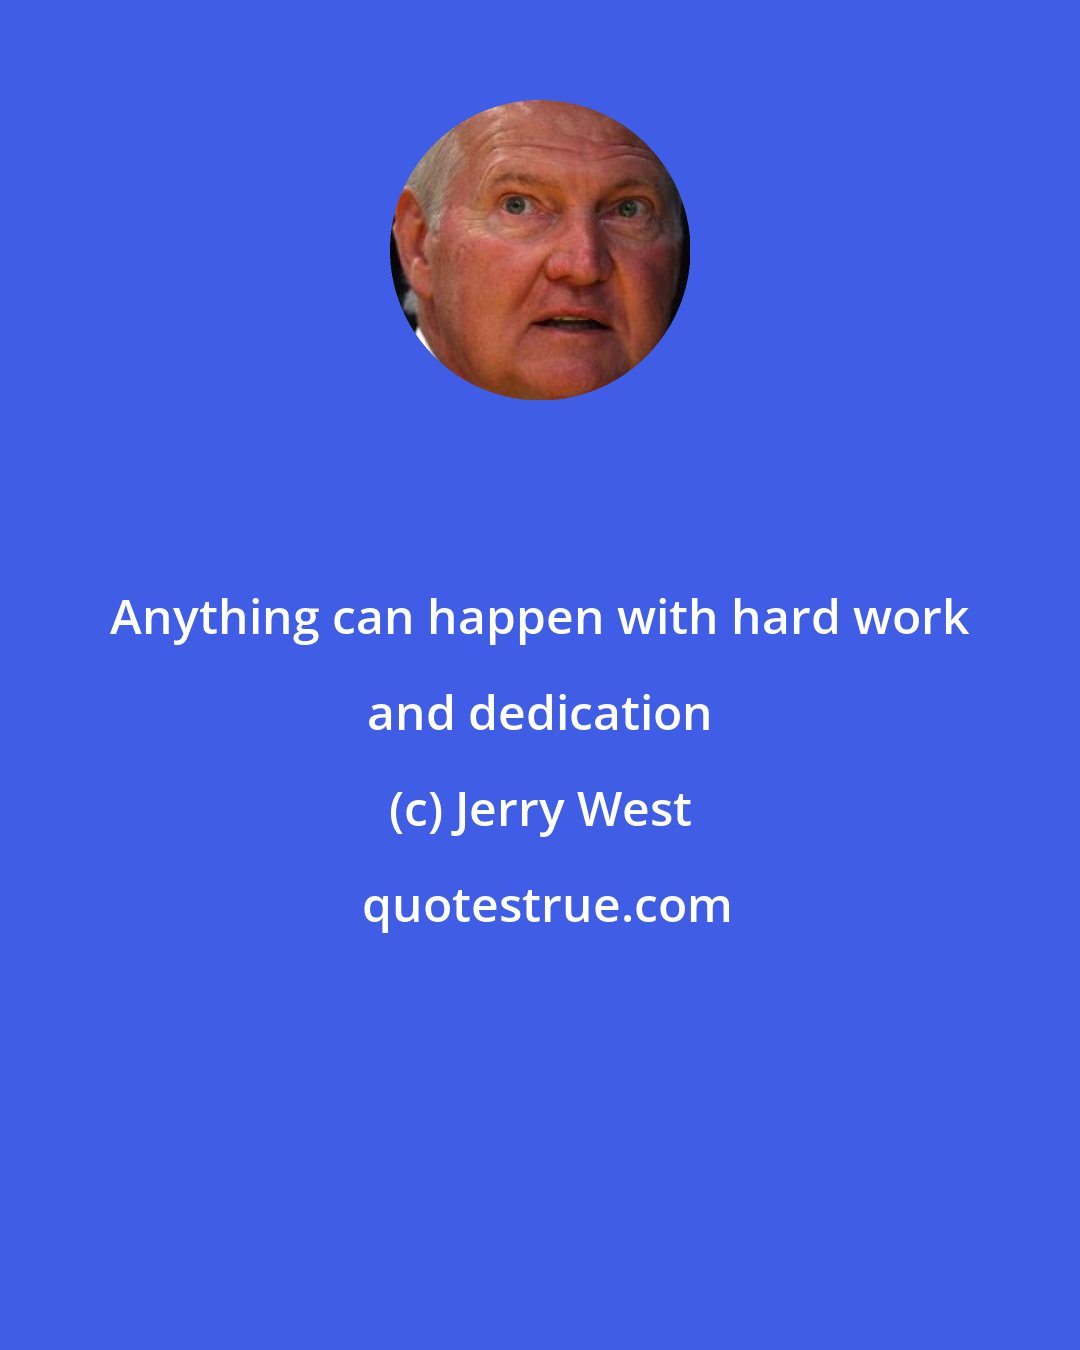 Jerry West: Anything can happen with hard work and dedication